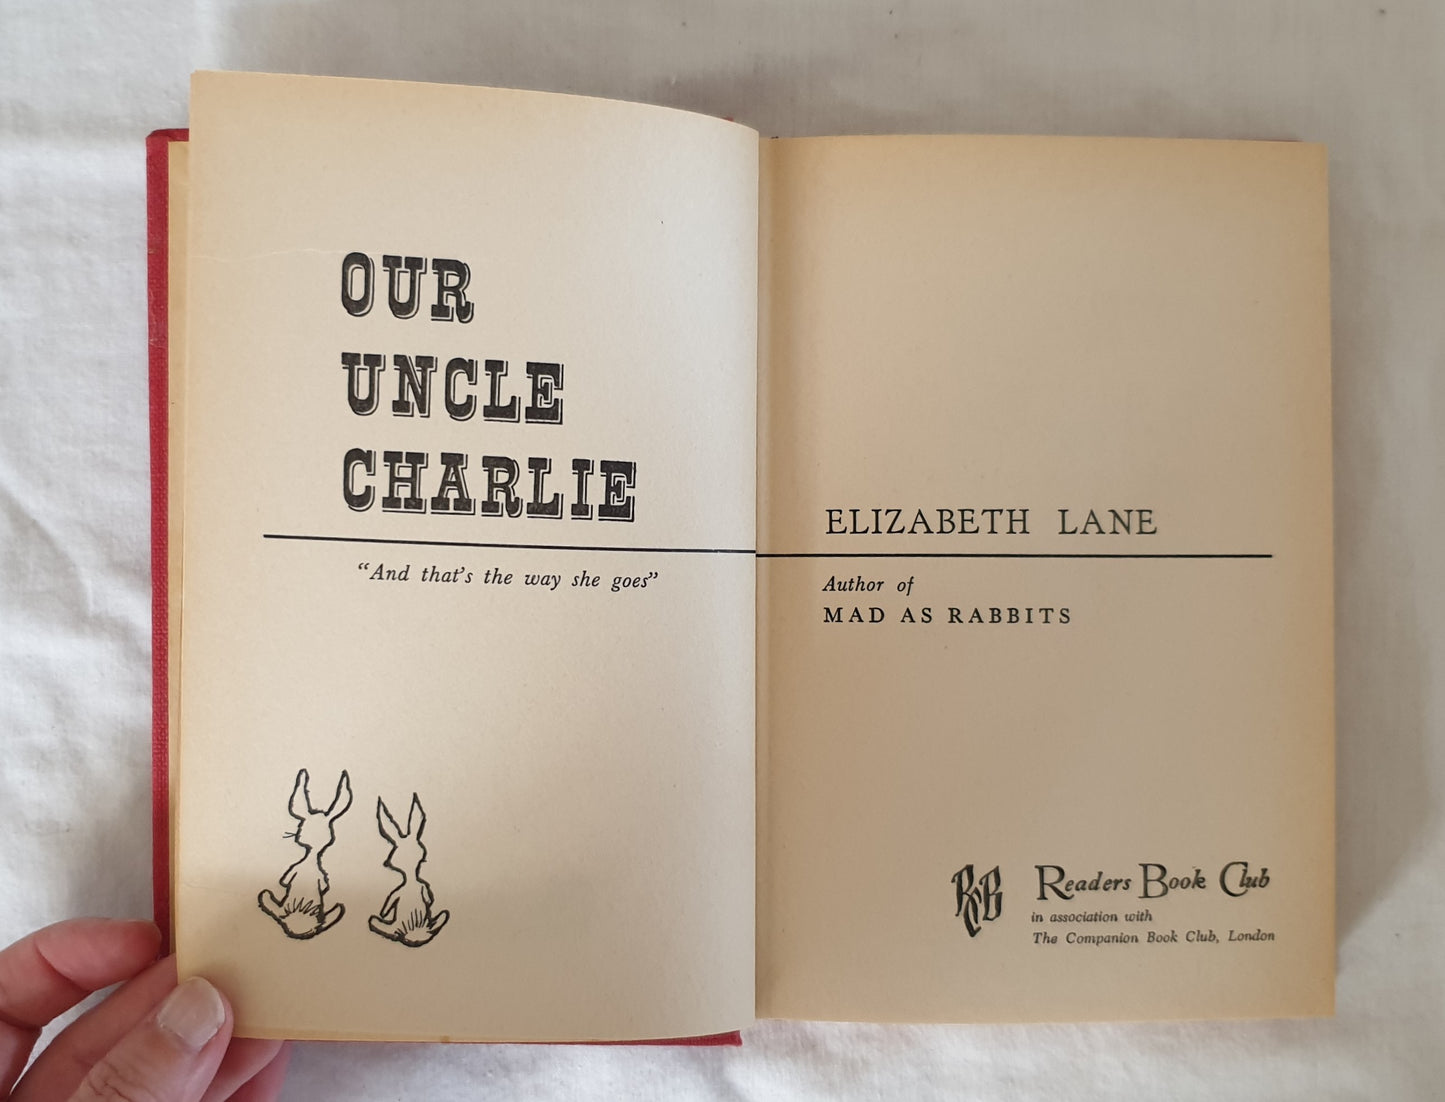 Our Uncle Charlie by Elizabeth Lane